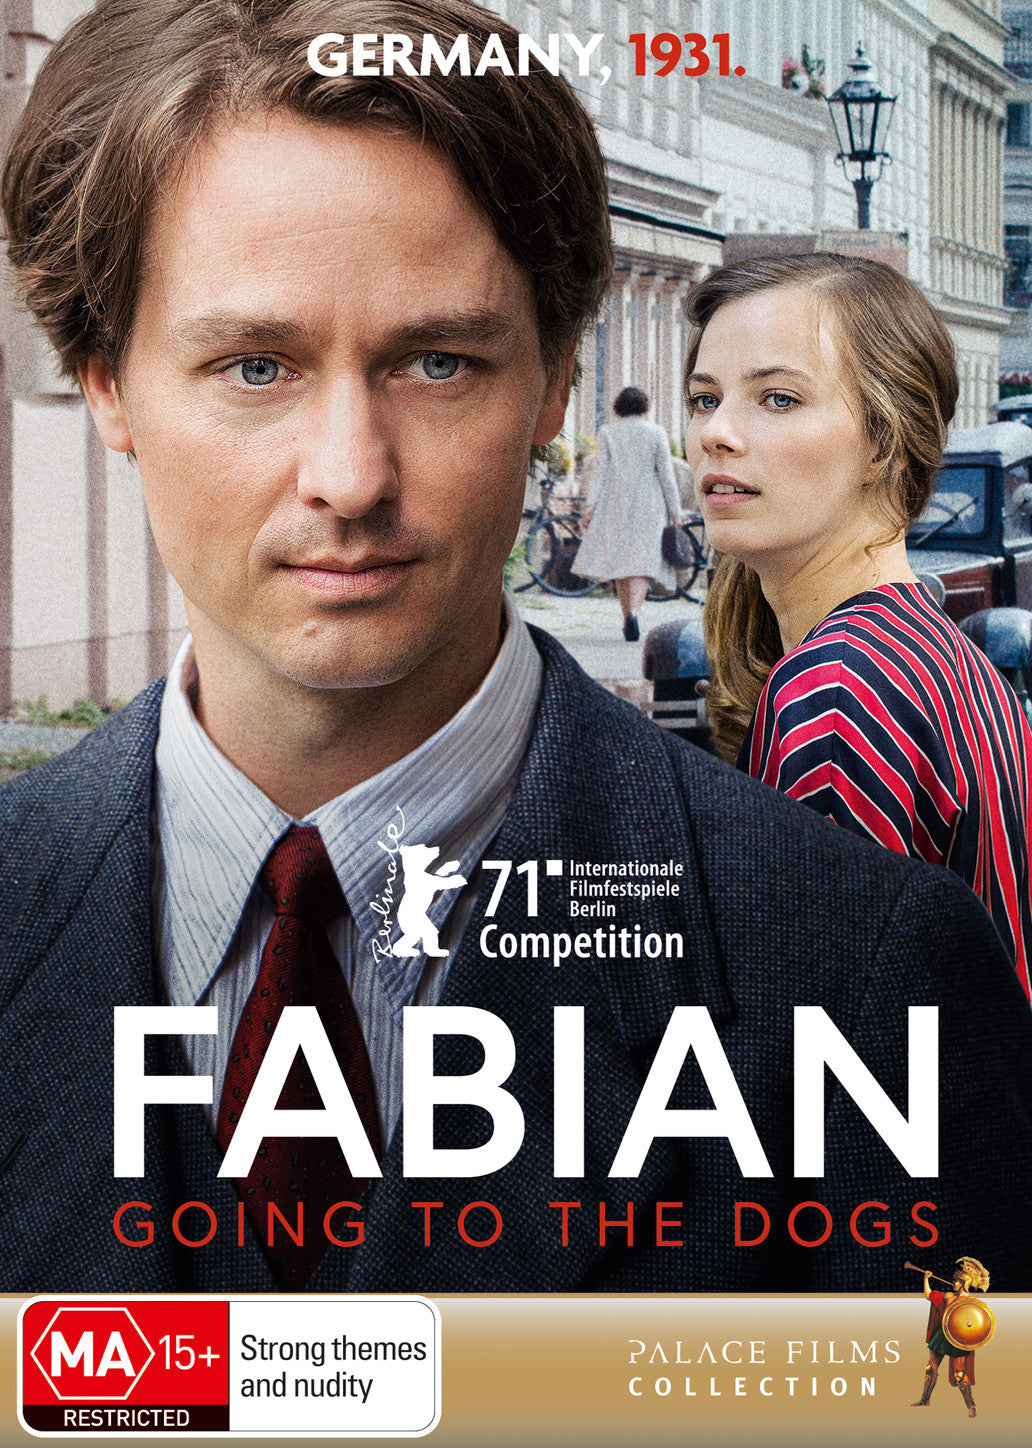 FABIAN - GOING TO THE DOGS